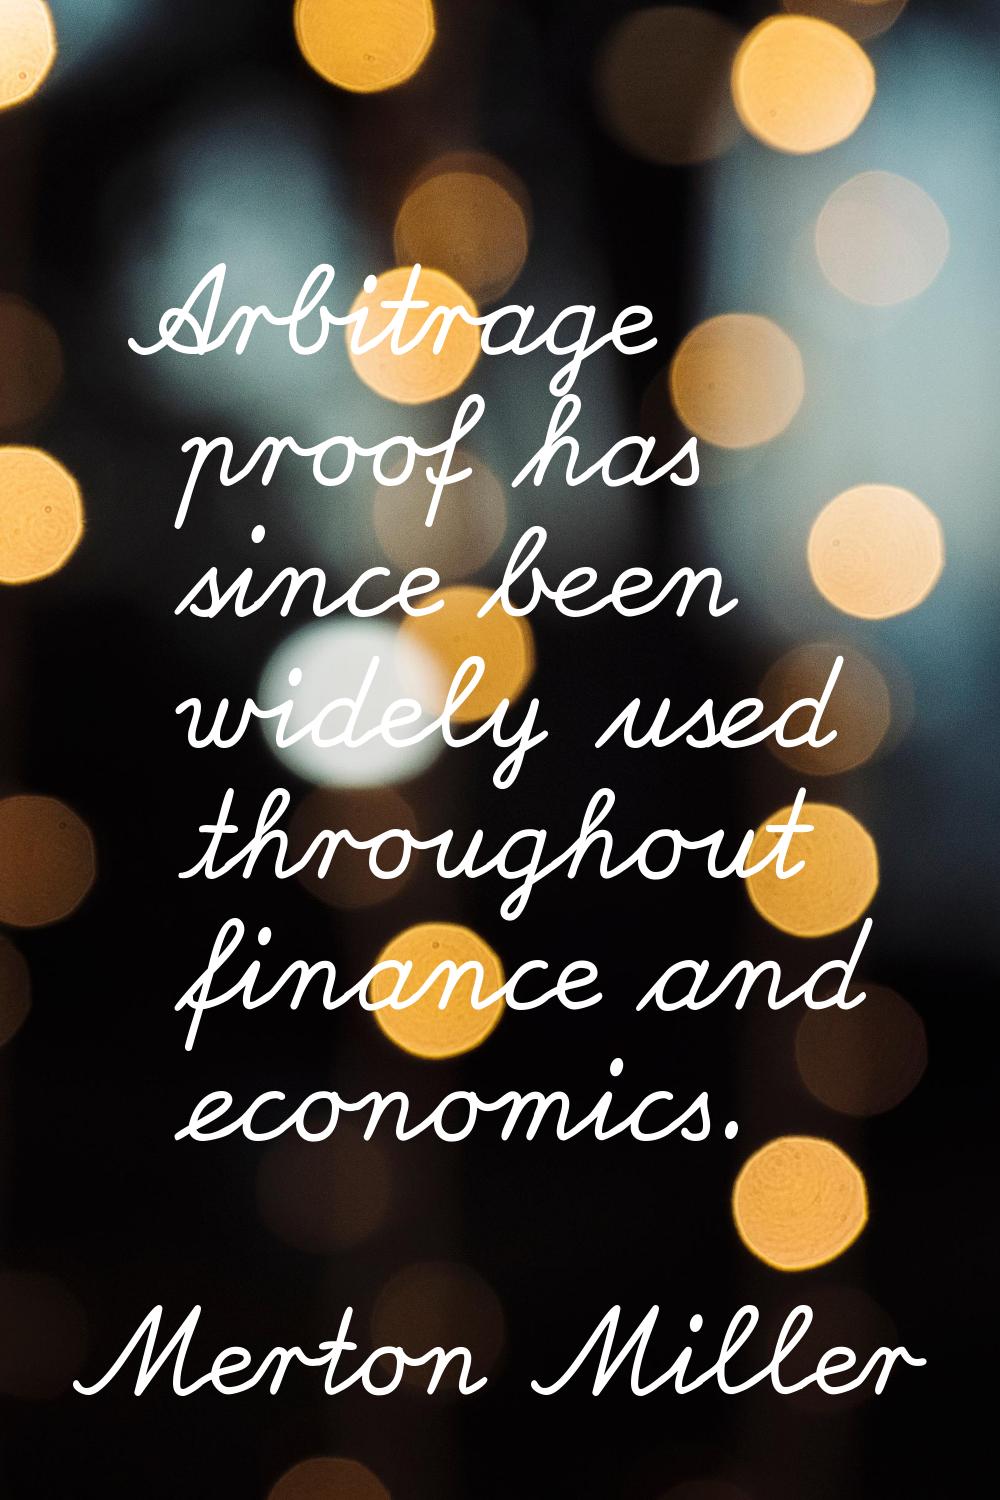 Arbitrage proof has since been widely used throughout finance and economics.